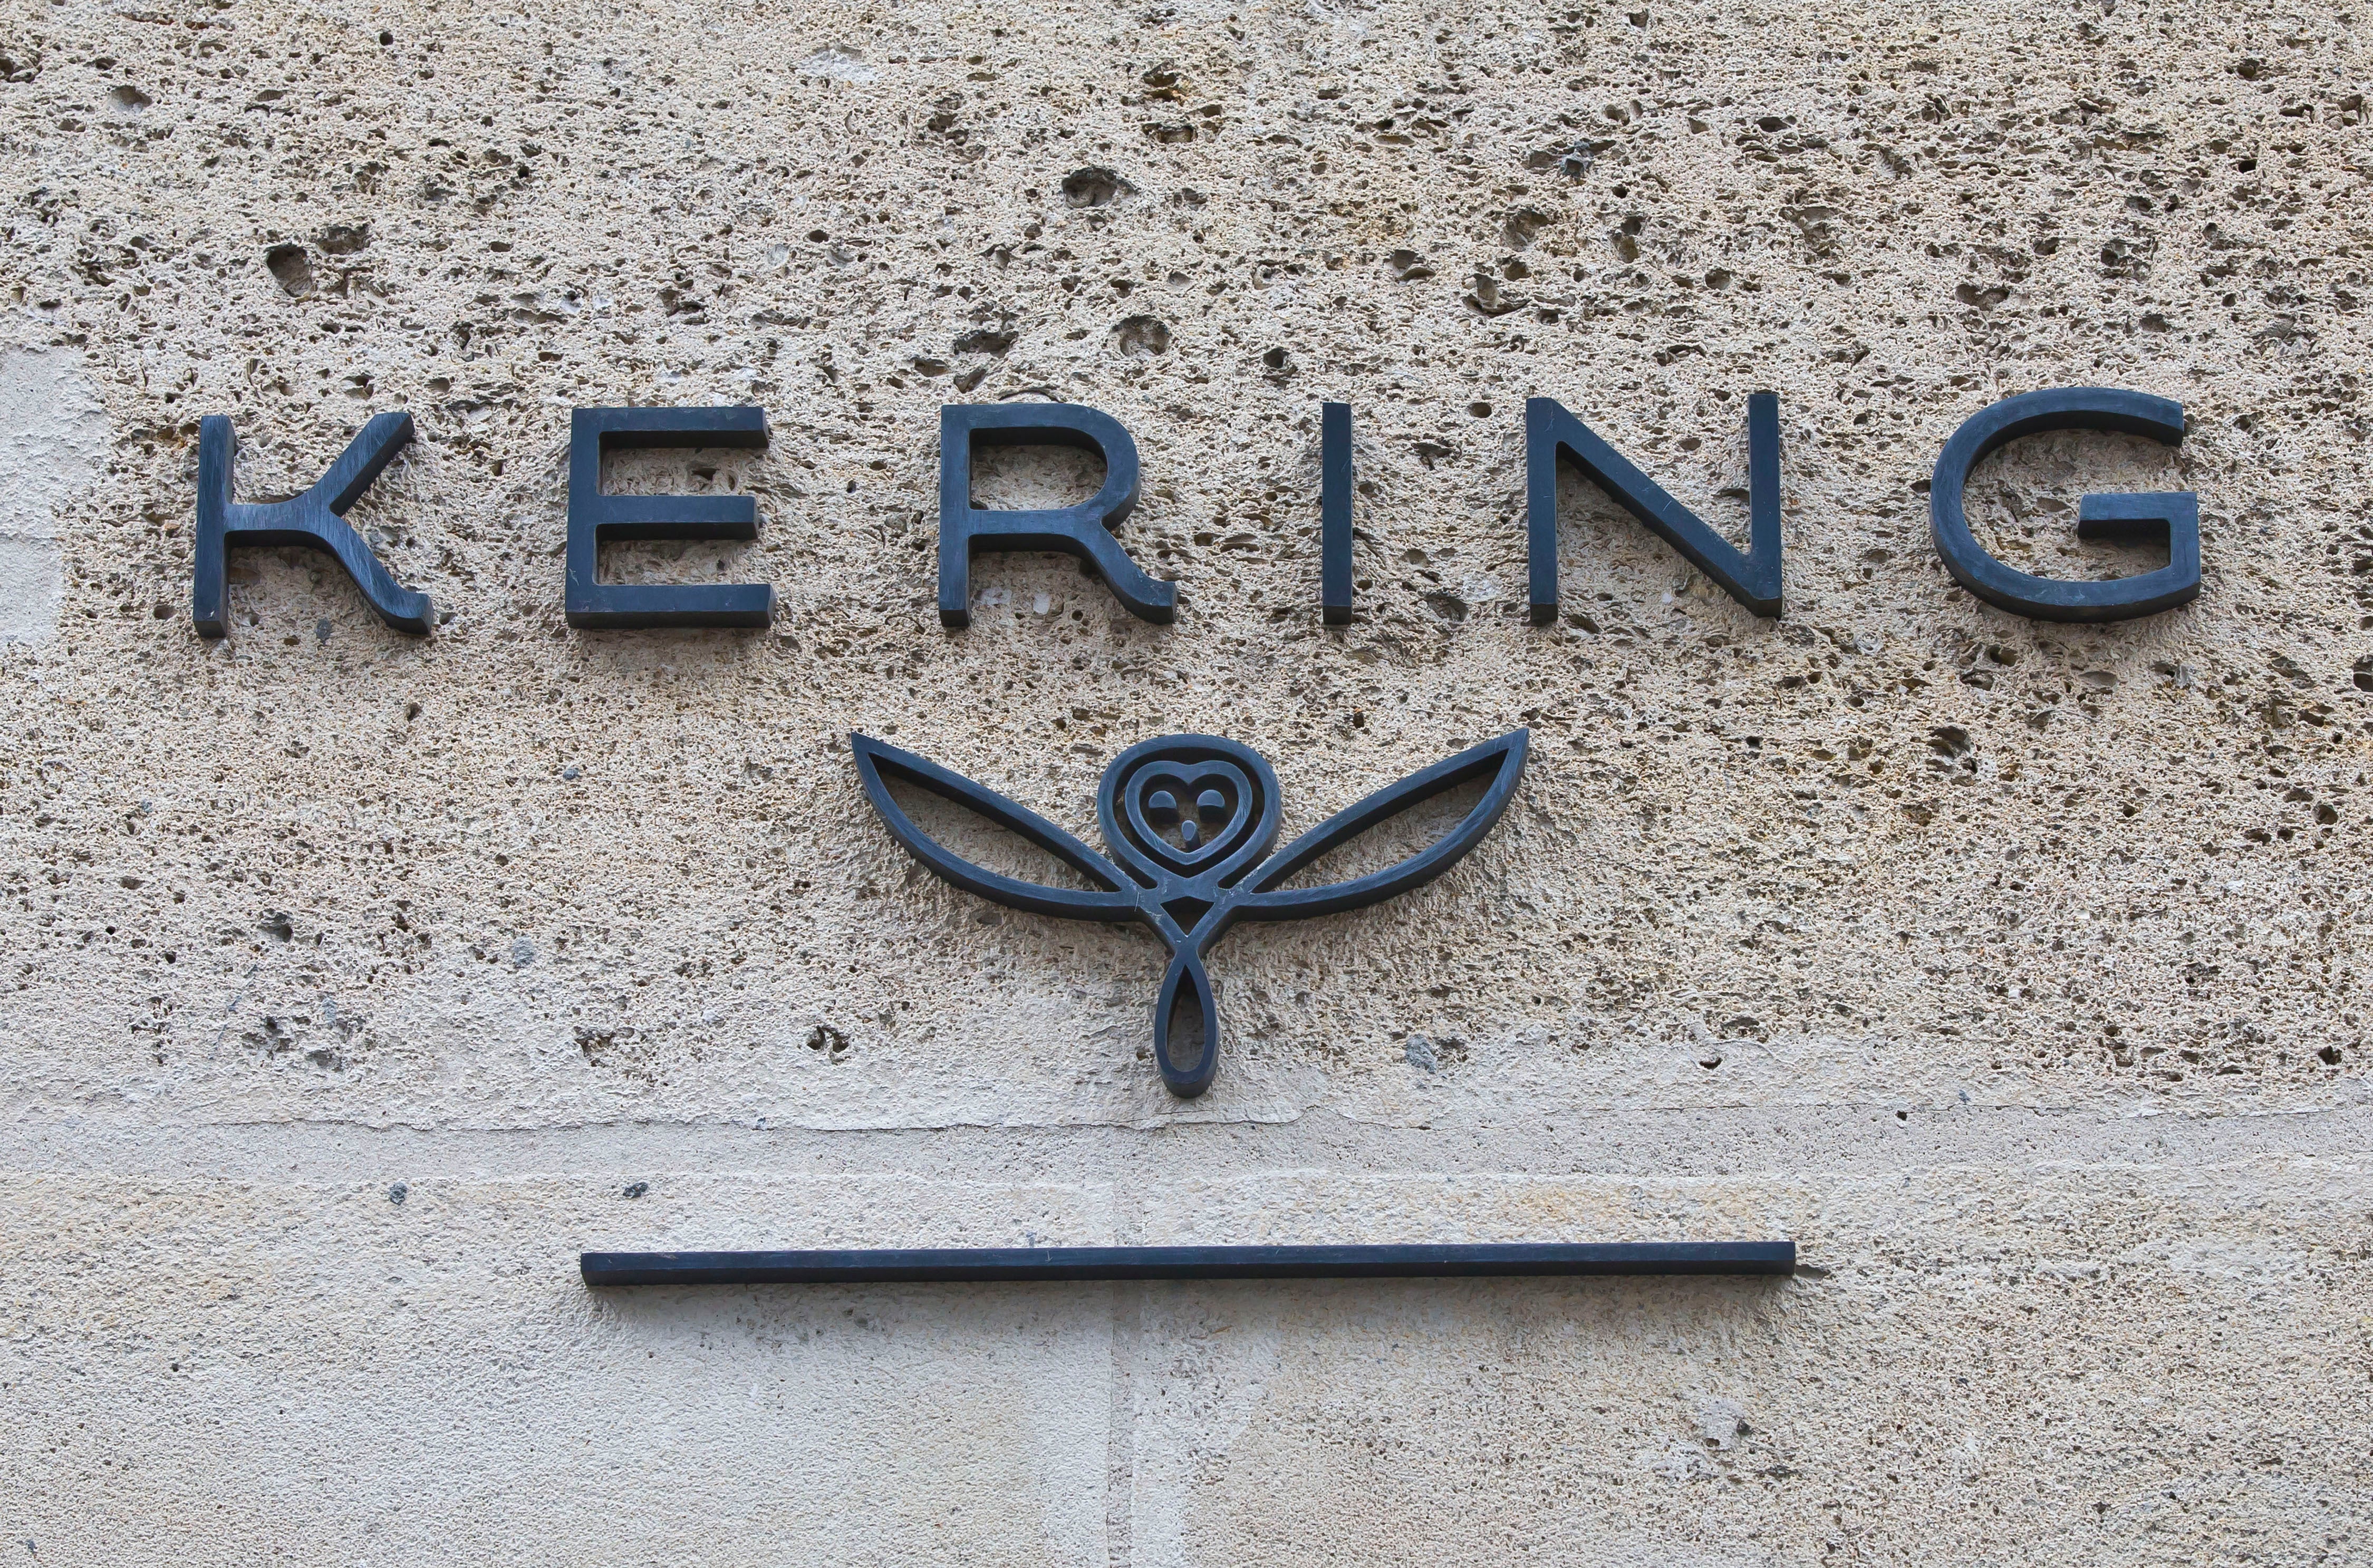 French luxury group Kering enters cosmetics business, Marketing